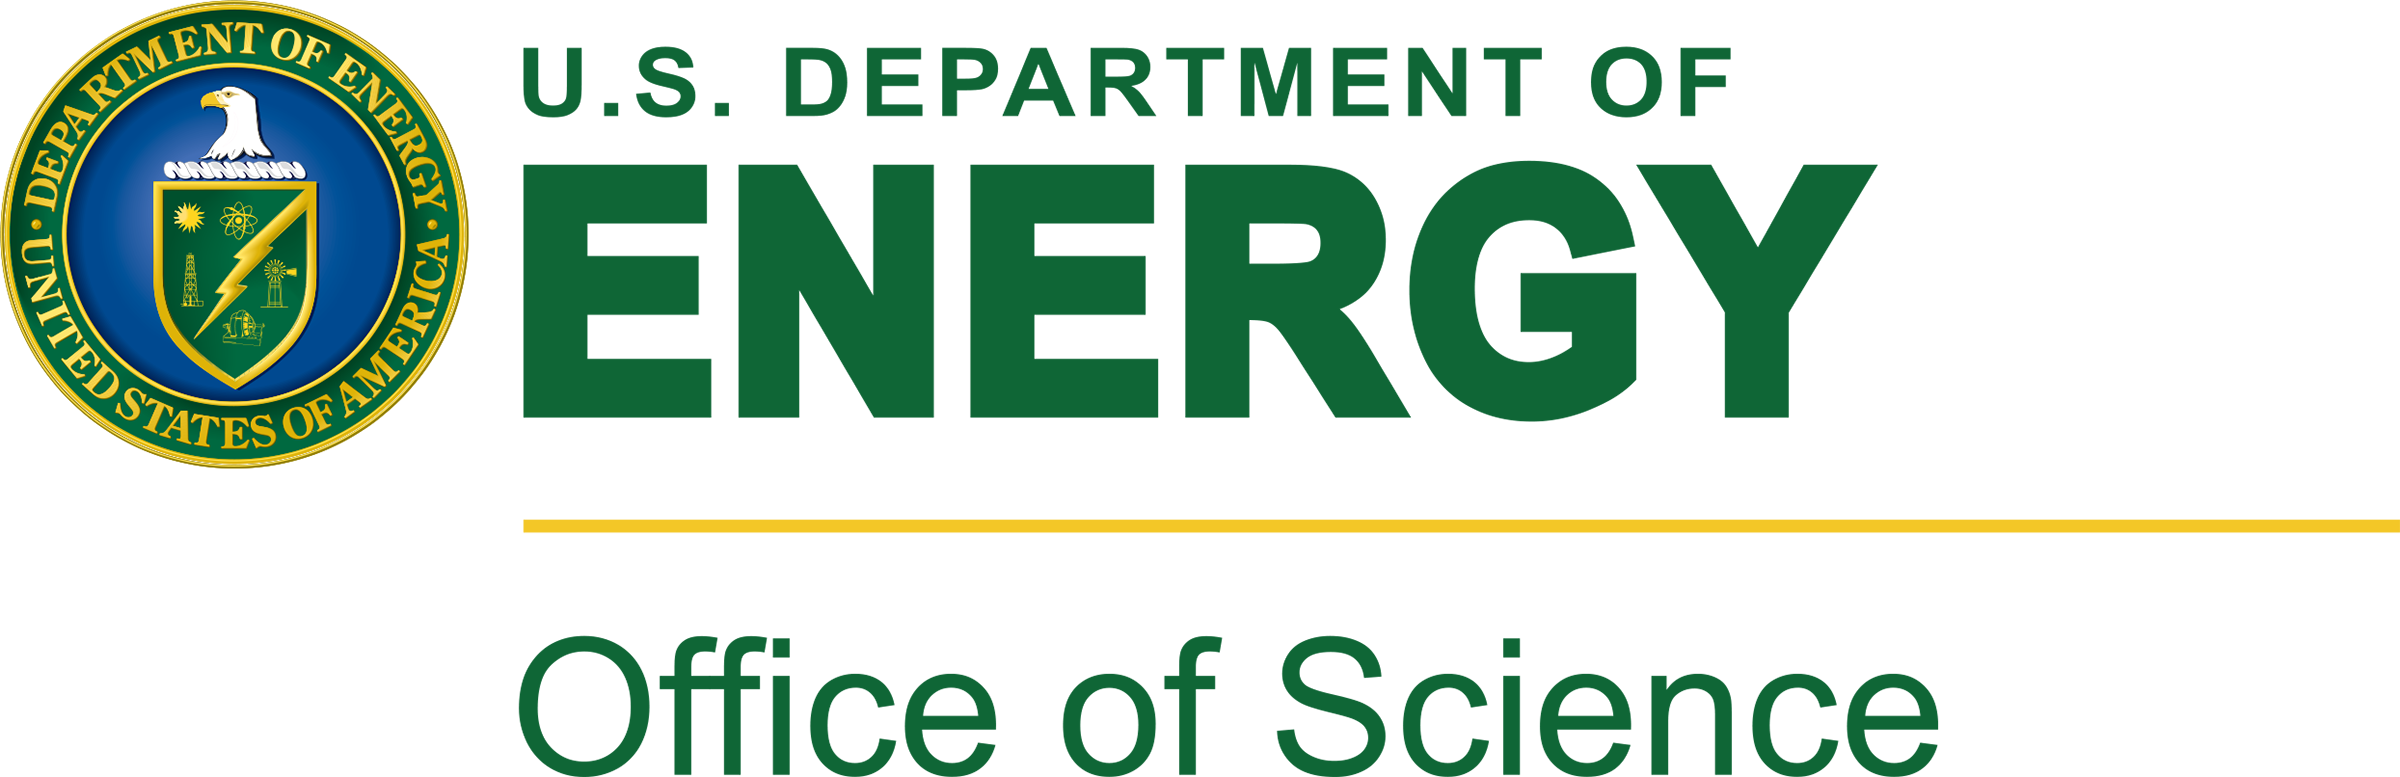 ASCR Science Highlights  U.S. DOE Office of Science (SC)